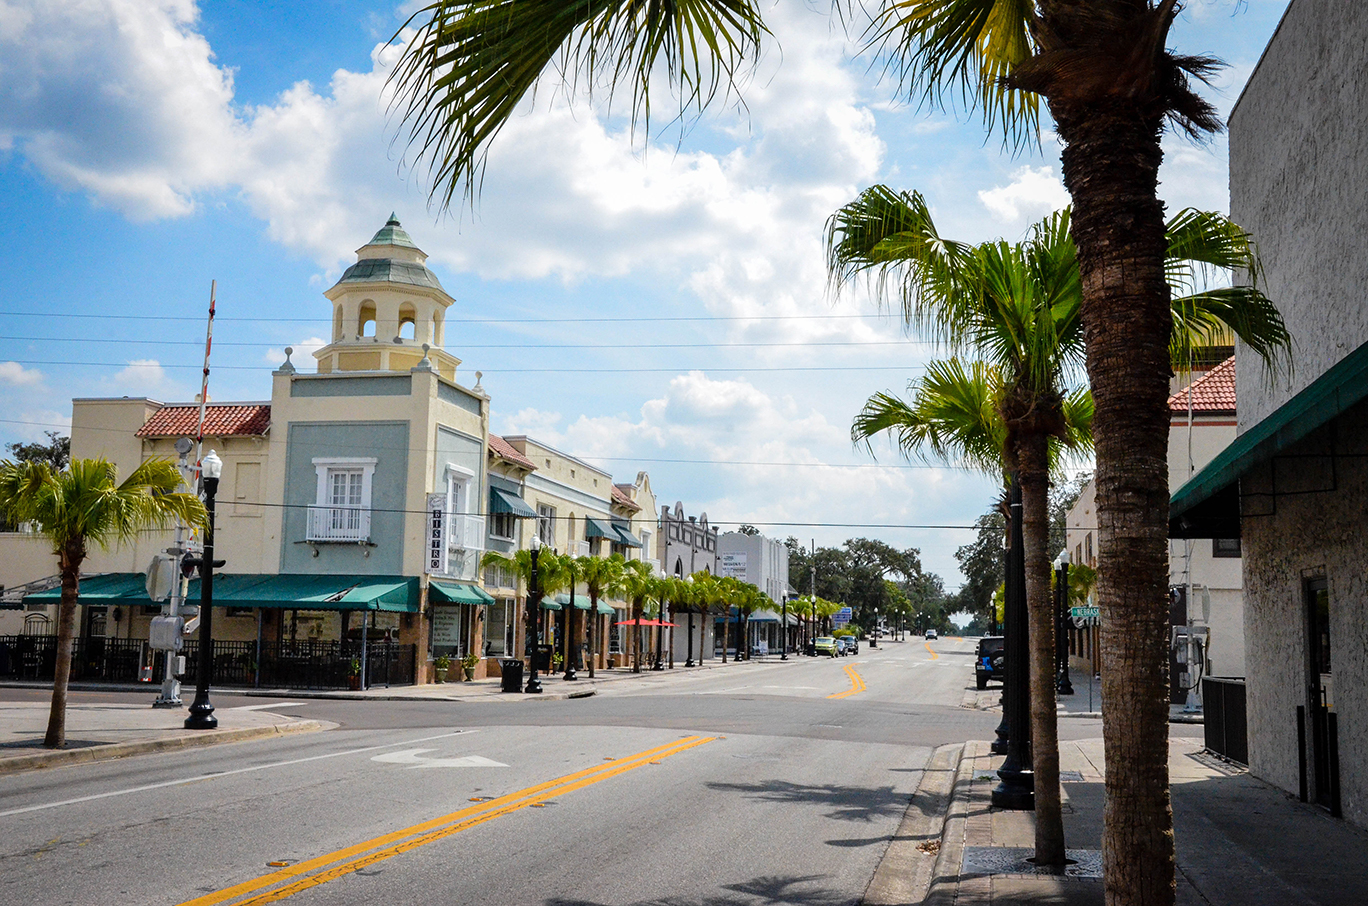 Street corner on a sunny day featuring a building with a cupola atop it. Palm trees dominate the foreground.